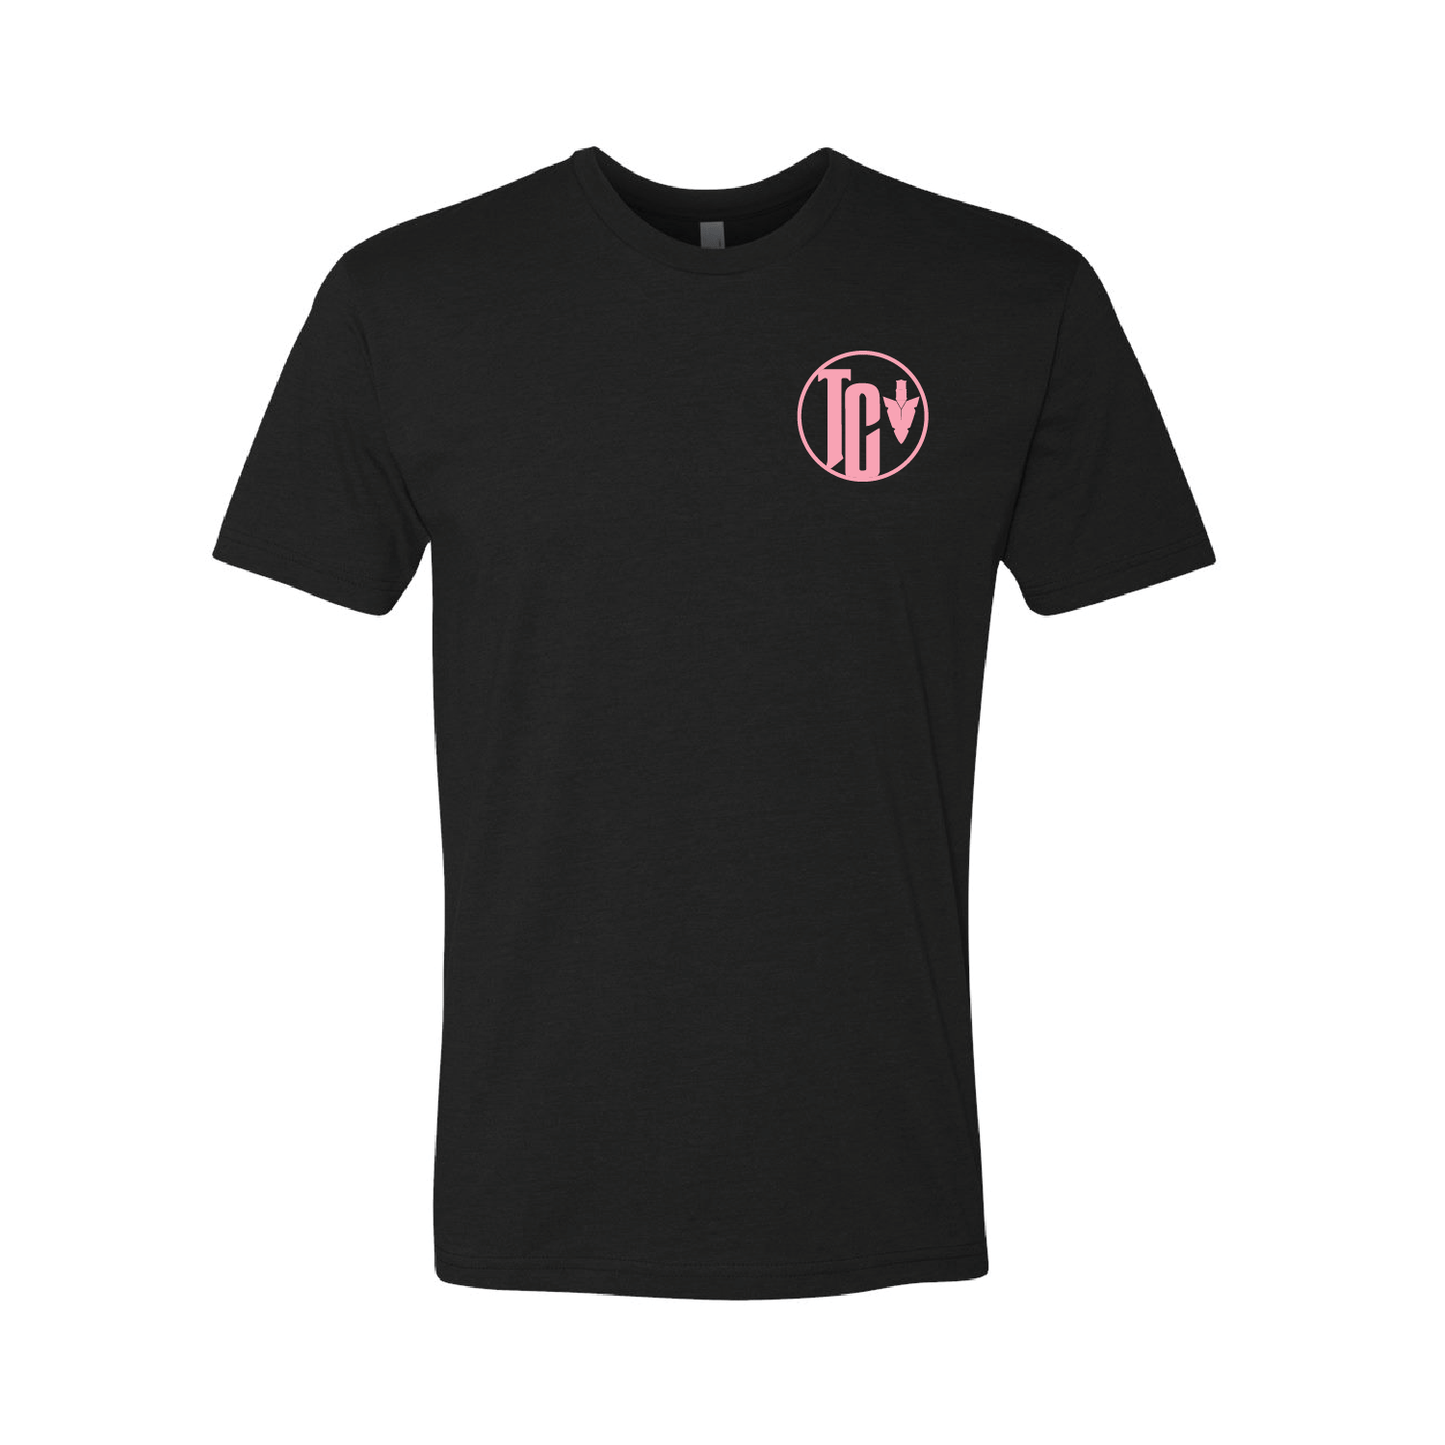 TODD CAMERON BLACK UNISEX TEE WITH PINK LOGO